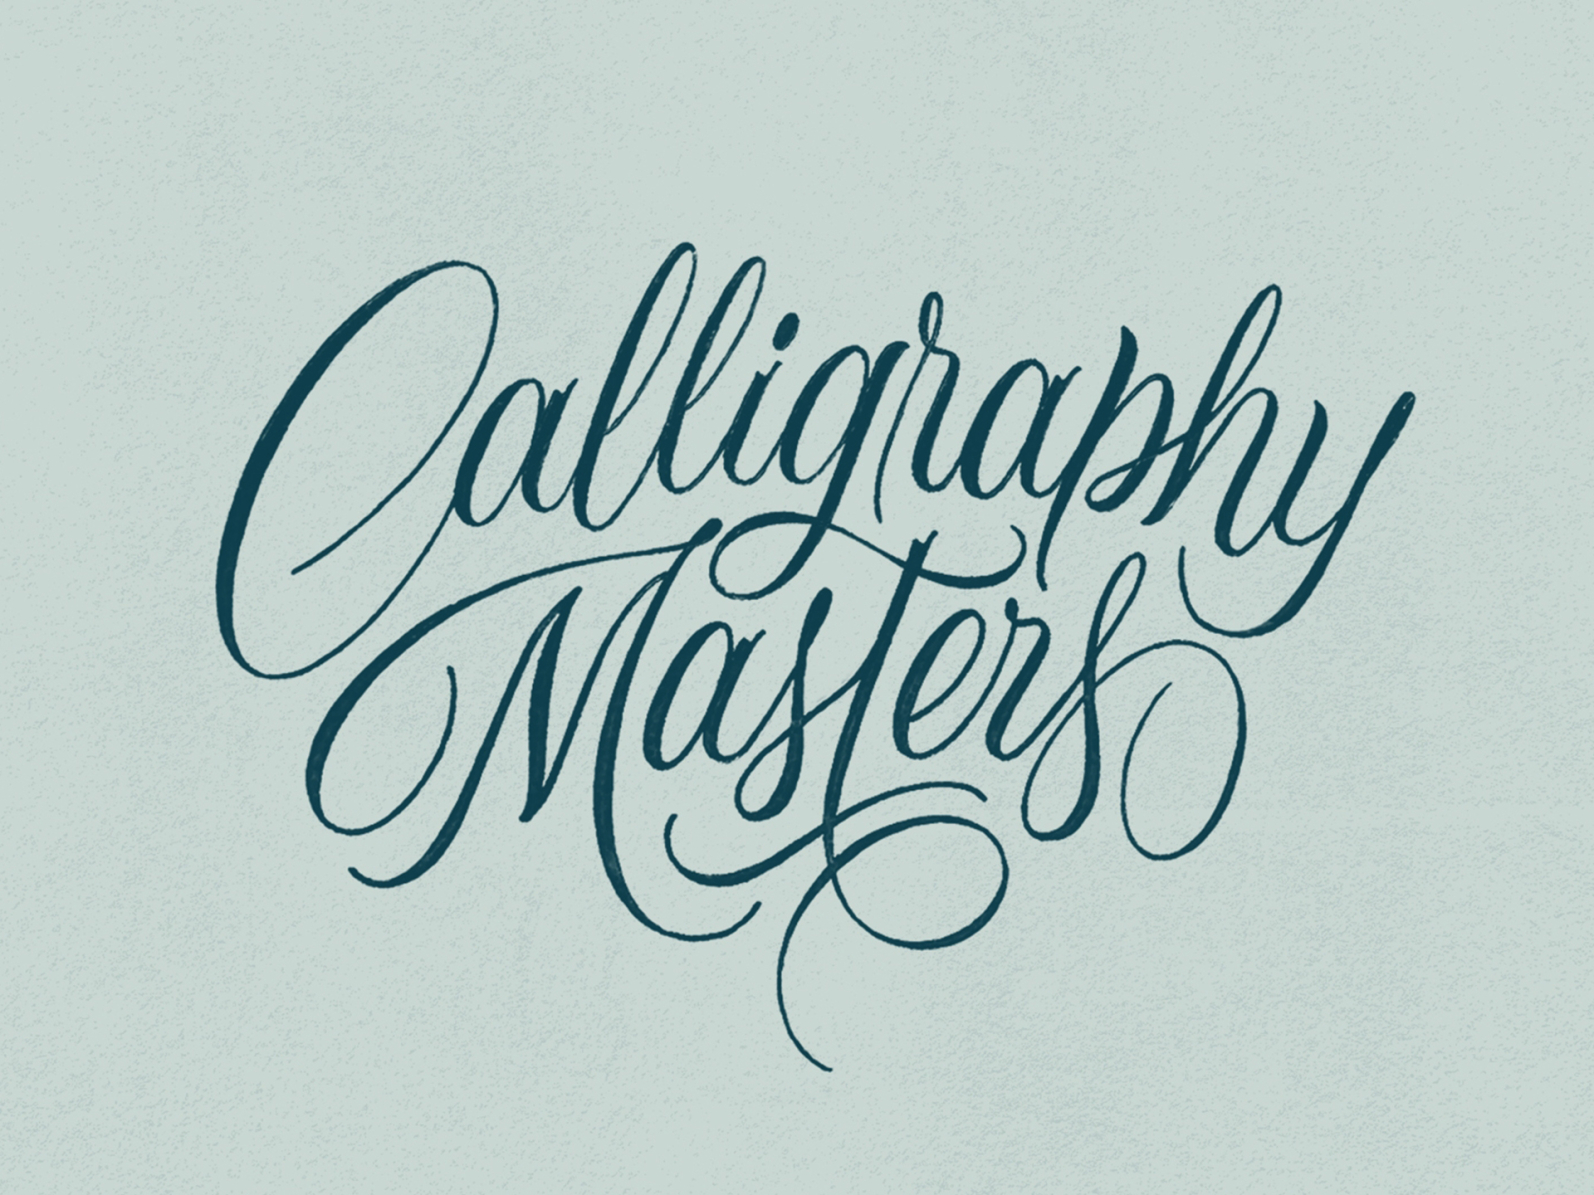 Calligraphy Masters by Ferdian M. R on Dribbble